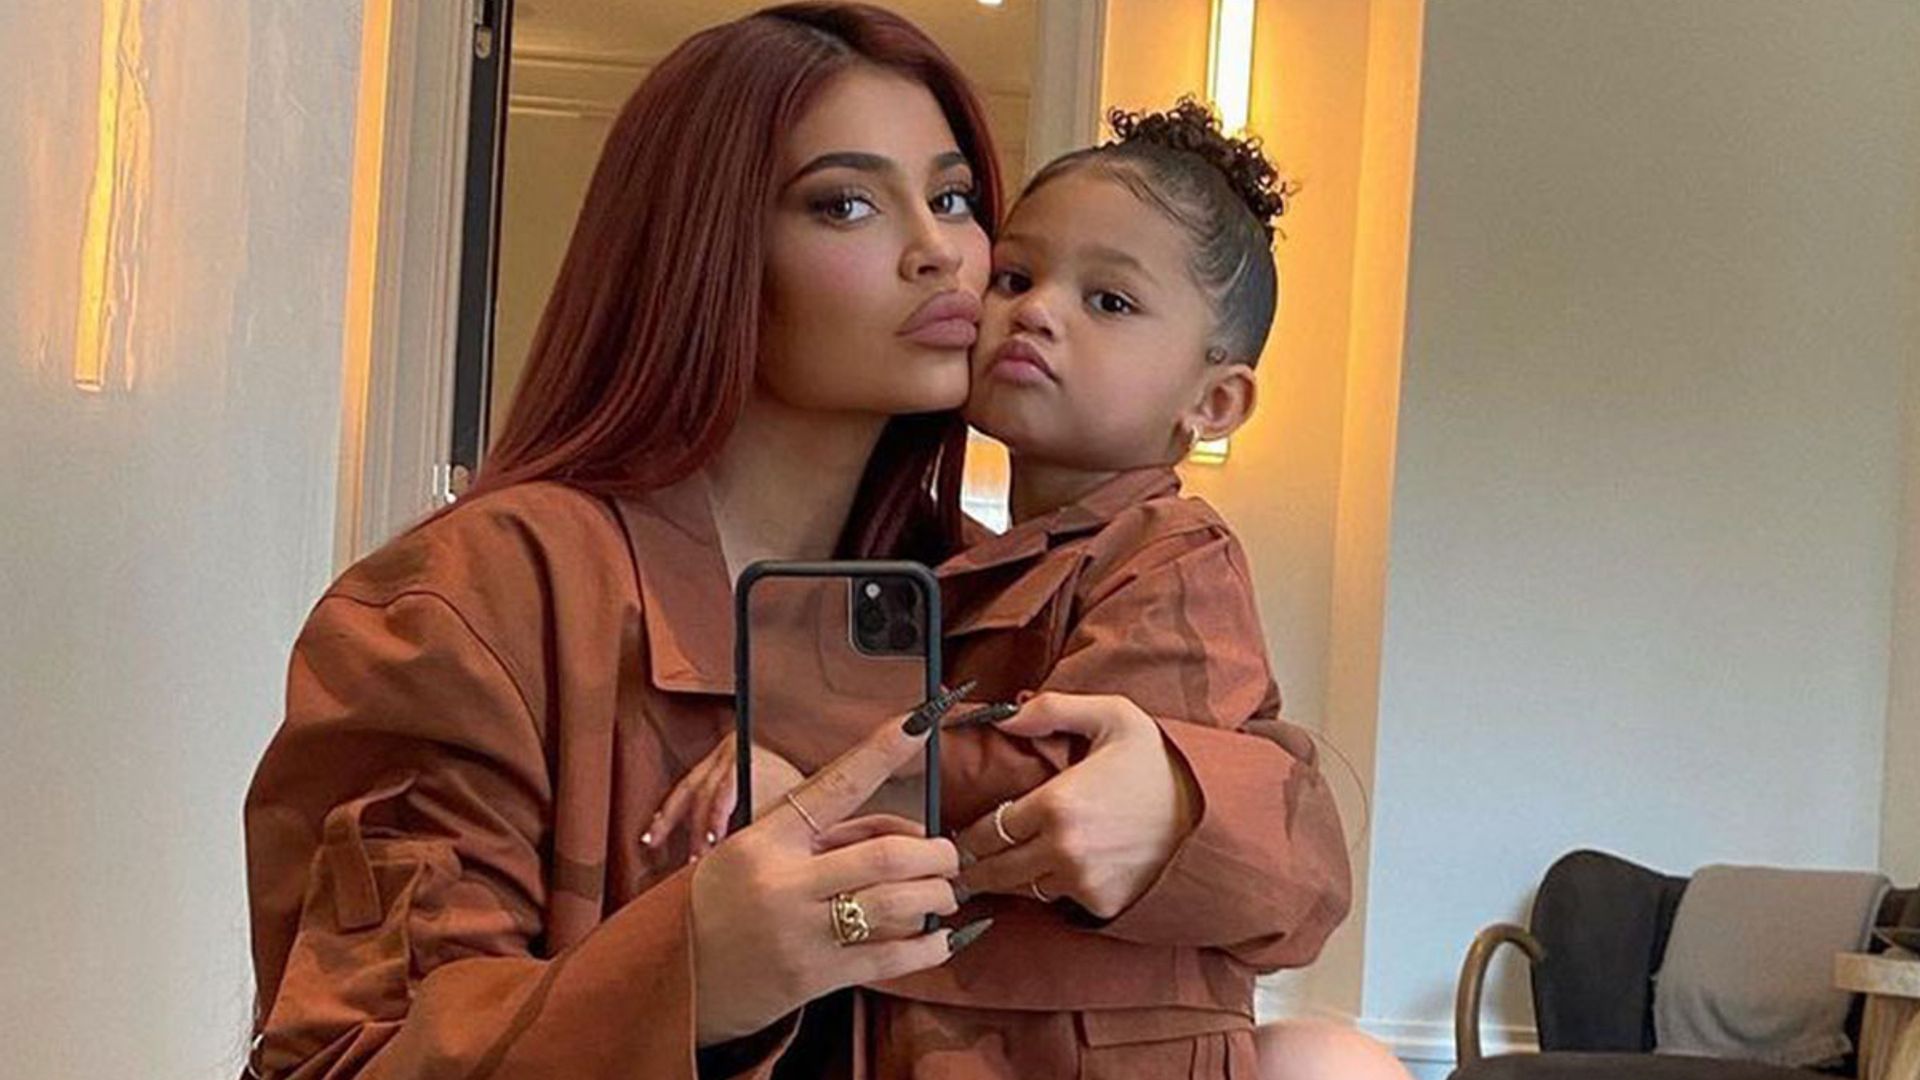 Kylie Jenner's daughter Stormi looks like a professional athlete - and fans react! 